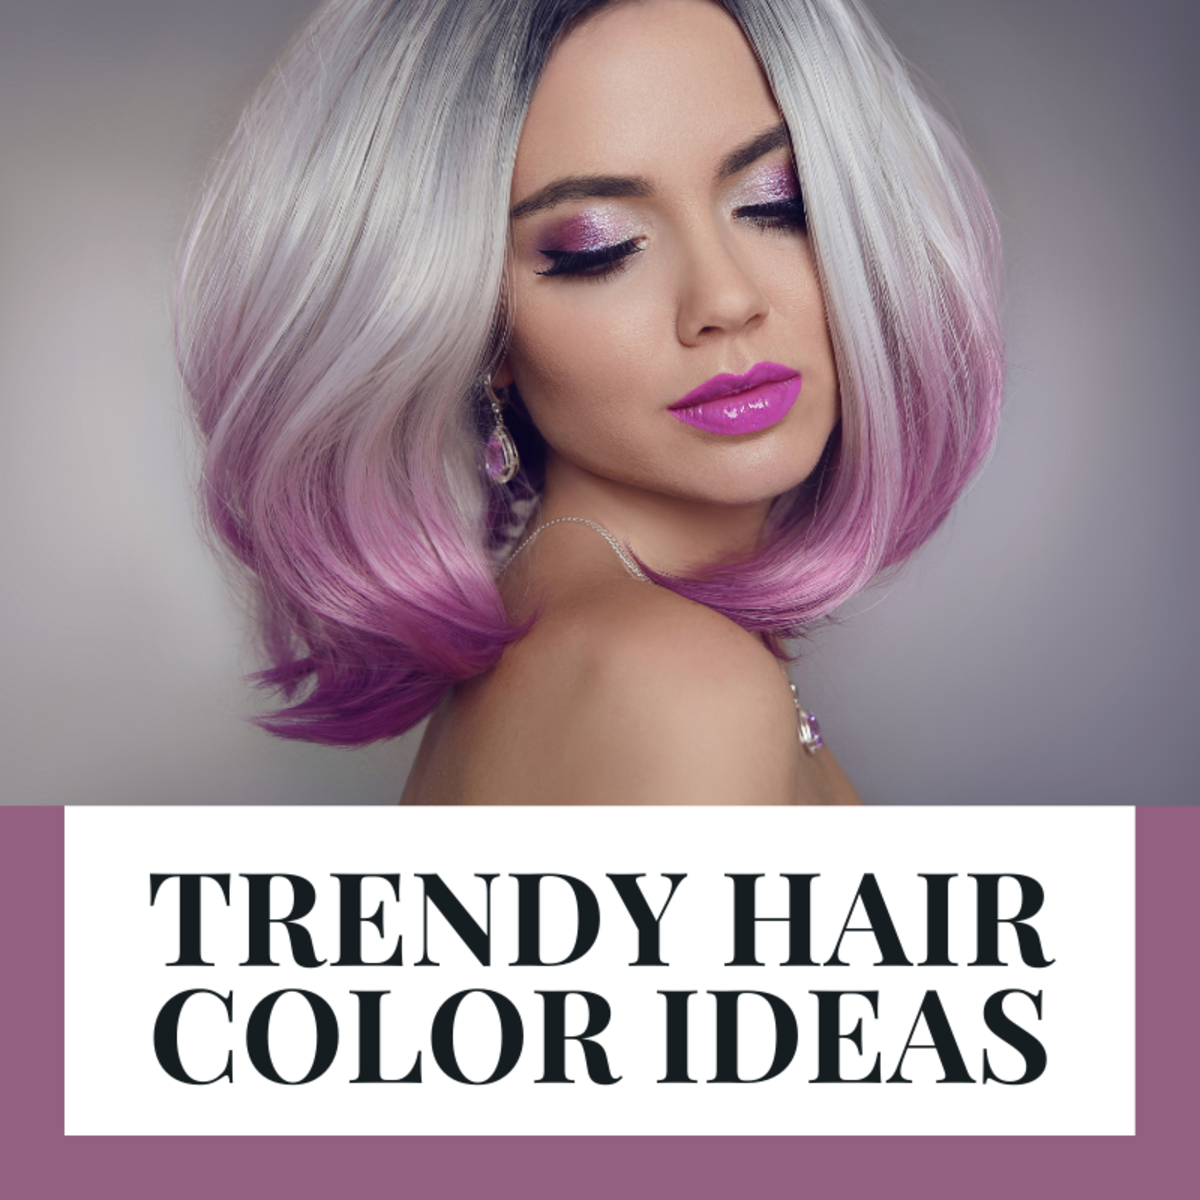 Trendy Hair-Color Ideas (Balayage, Ombre, and More!) - Bellatory